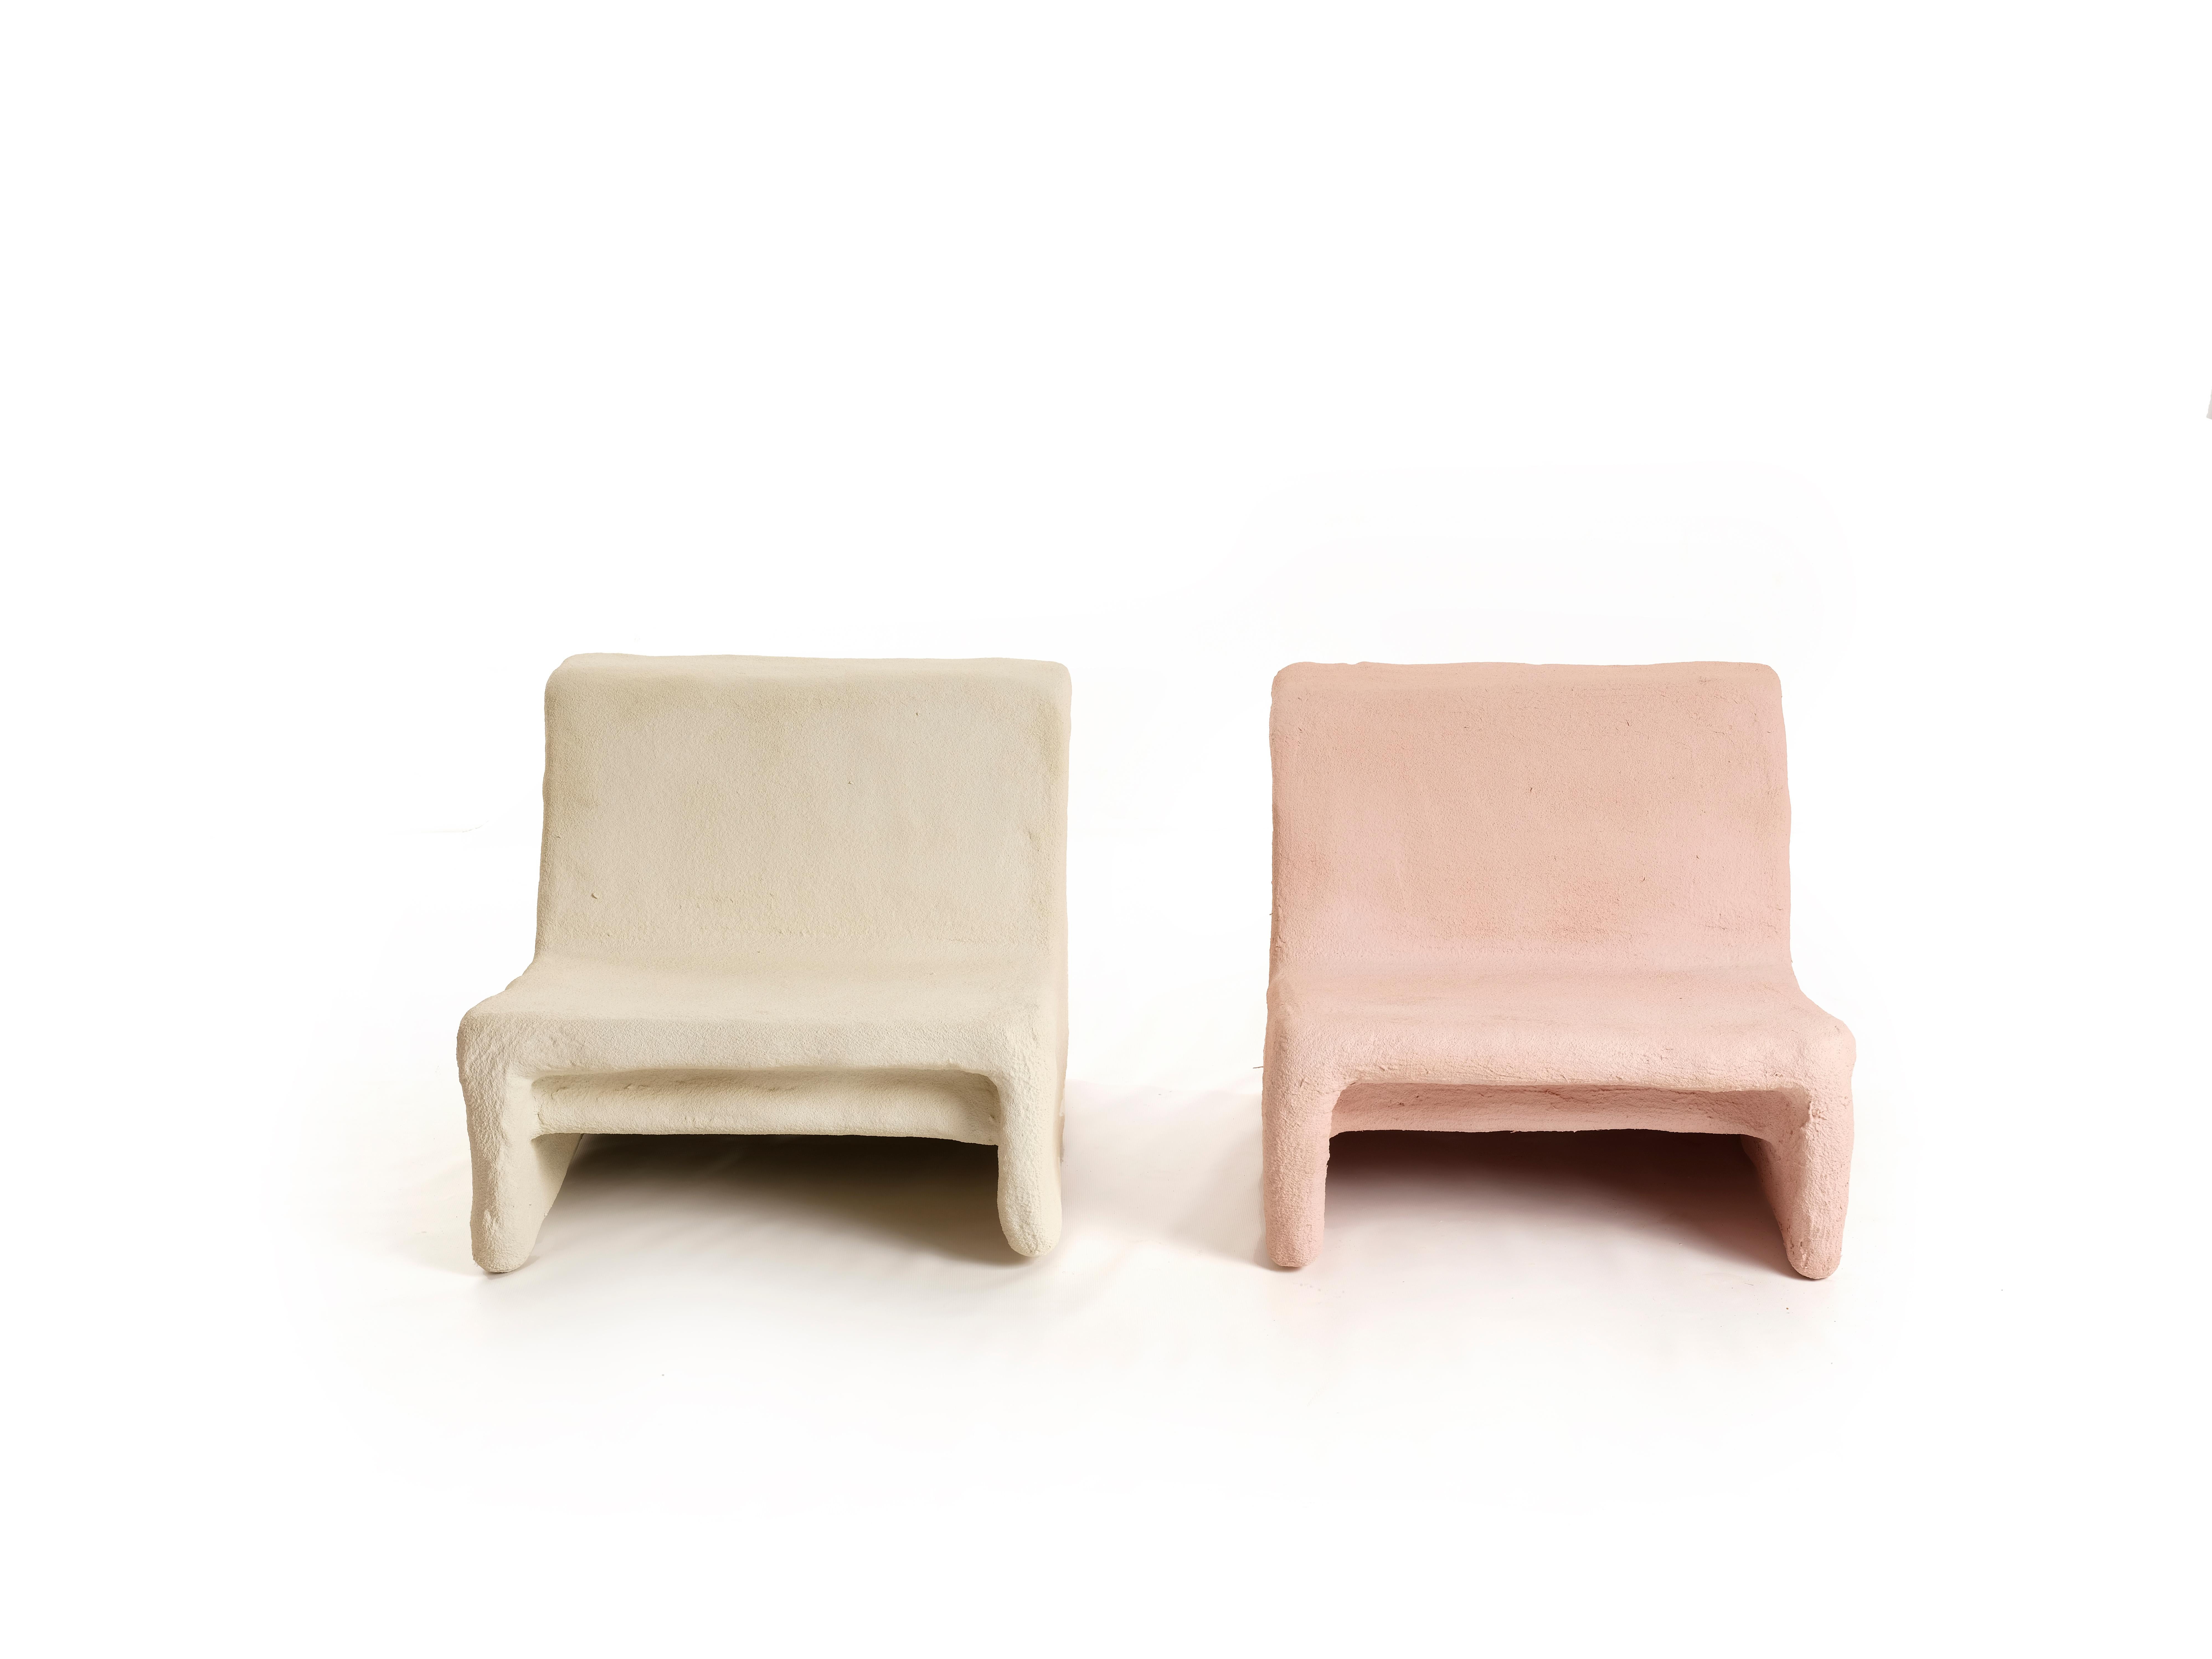 Daisy chair by Mary-Lynn & Carlo, 2021
The Elephant Project
Dimensions: H 60 x W 69 x D 81 cm
Materials: concrete colored, foam polystyrene
Finish: water, stains repellent

Marylynn and Carlo:

The Massoud siblings have been experimenting